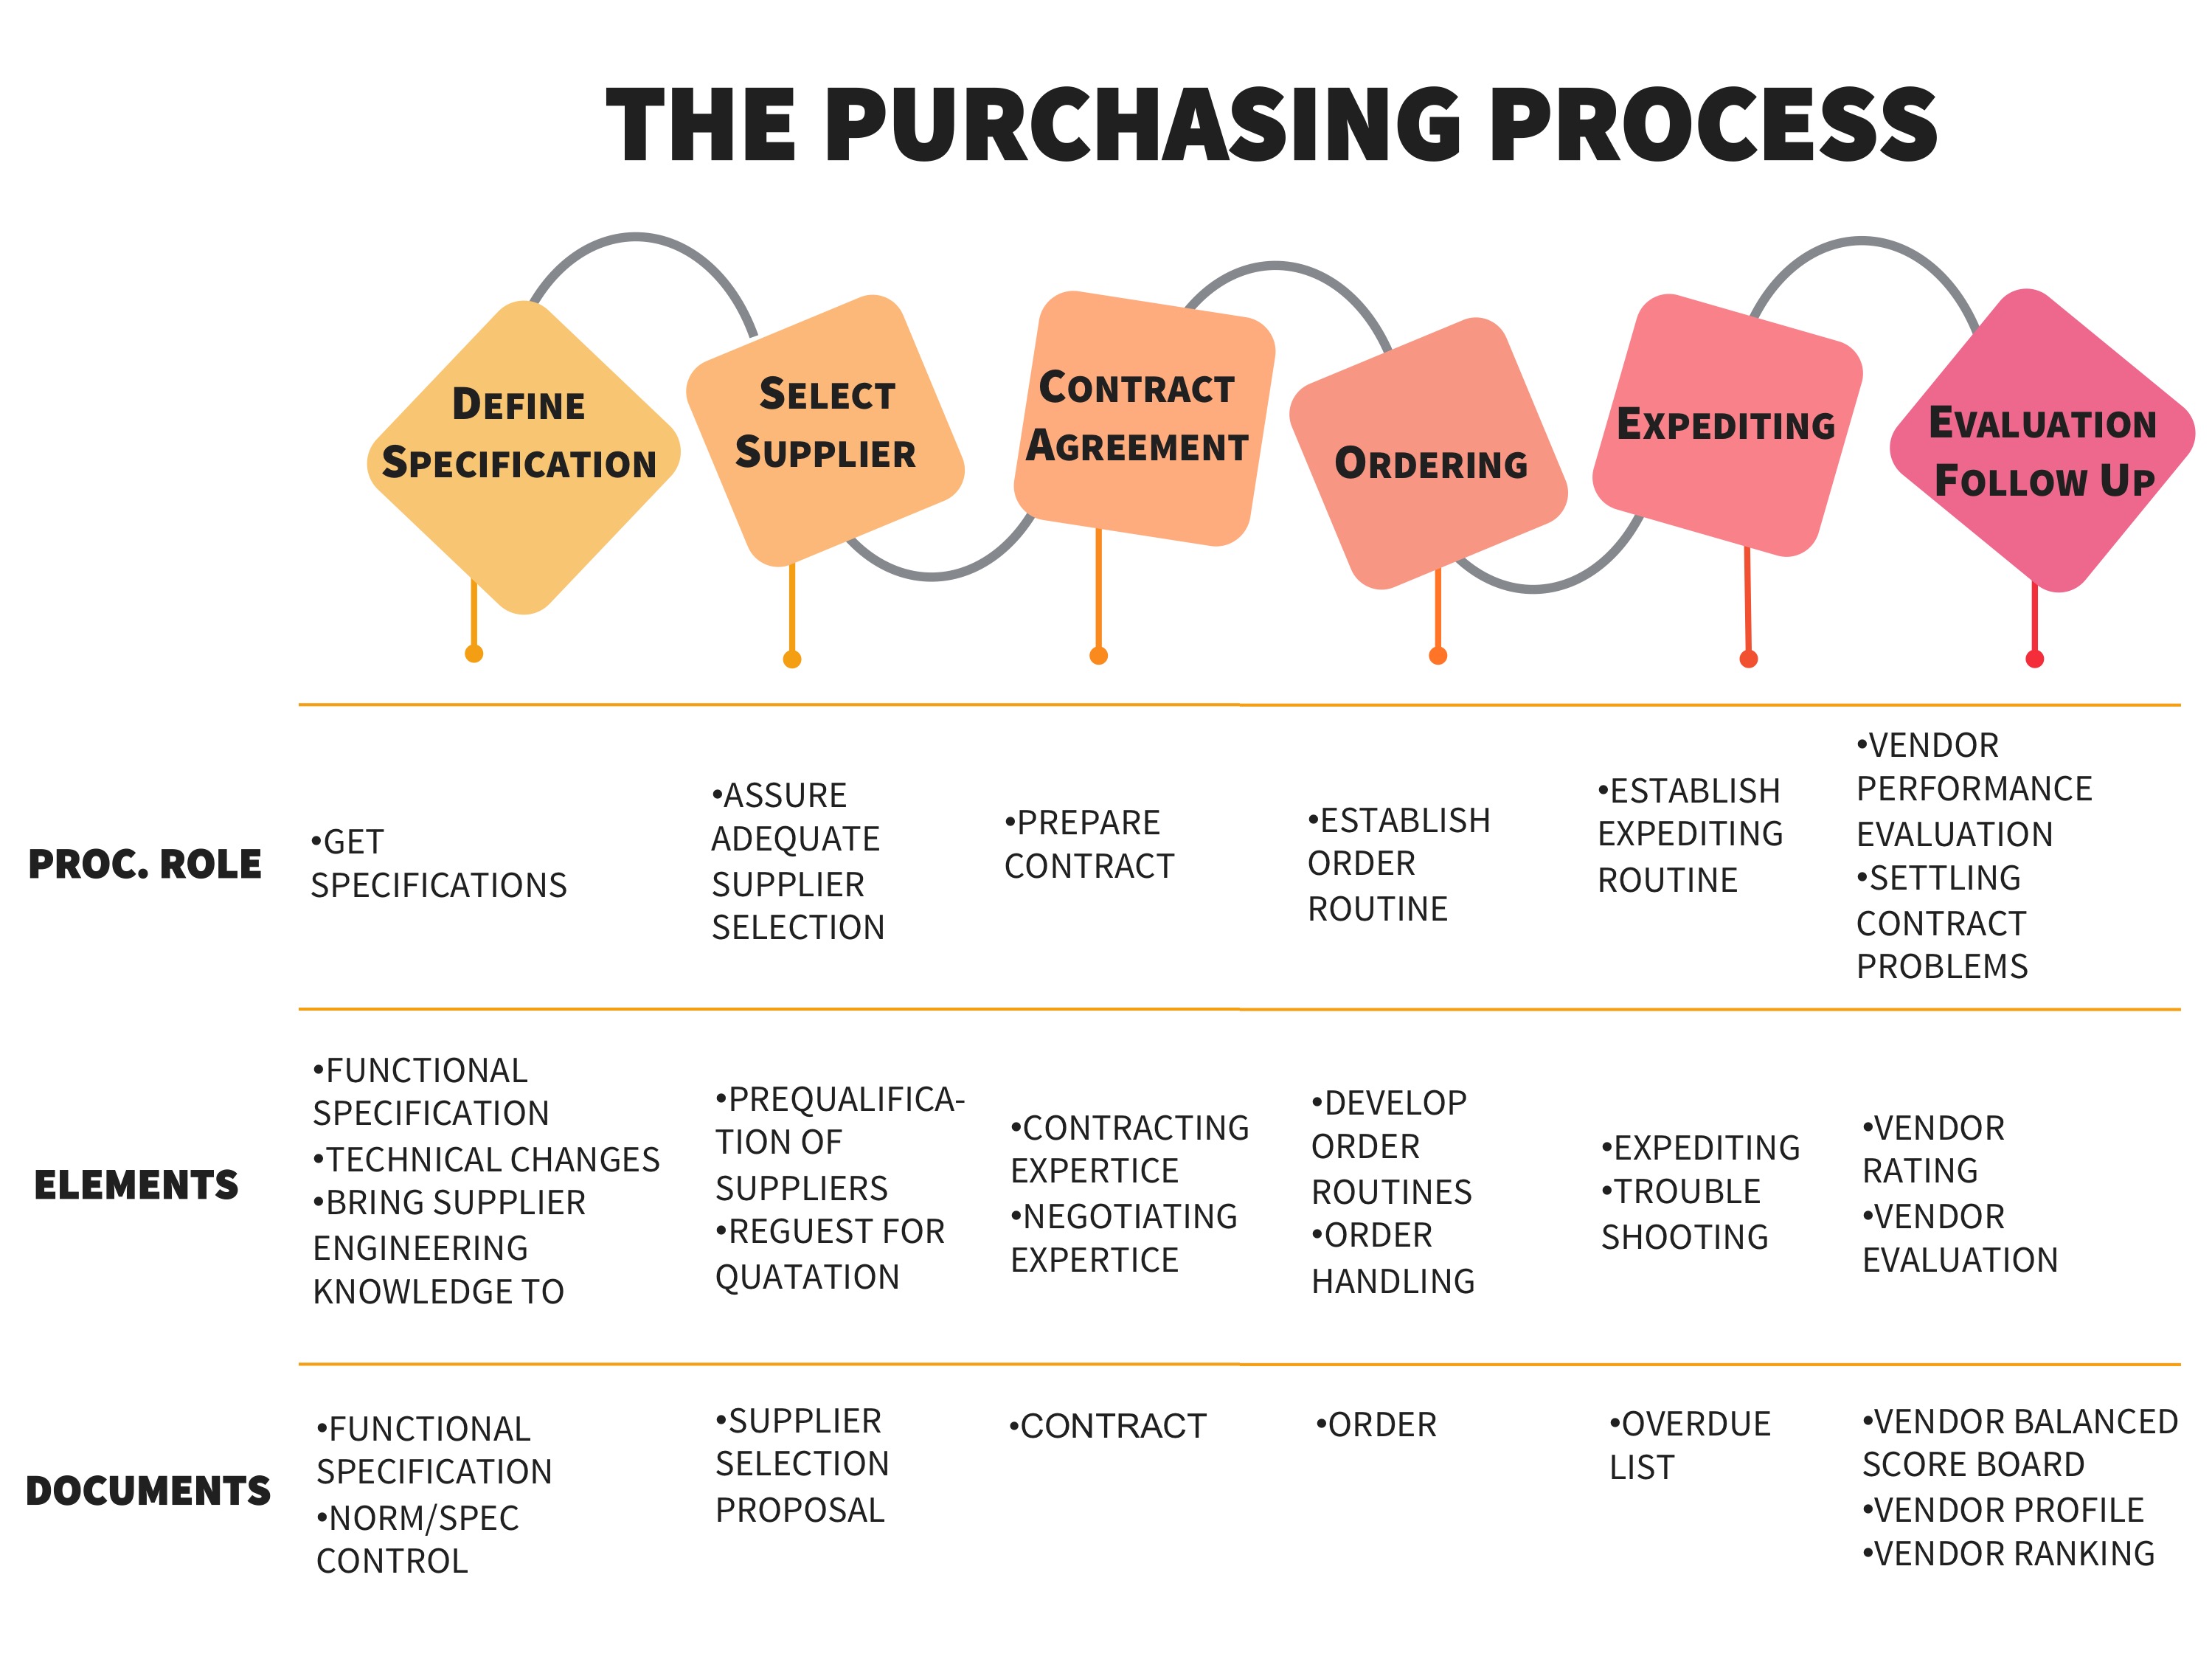 Buying Behavior and Purchasing Process Global Fashion Business